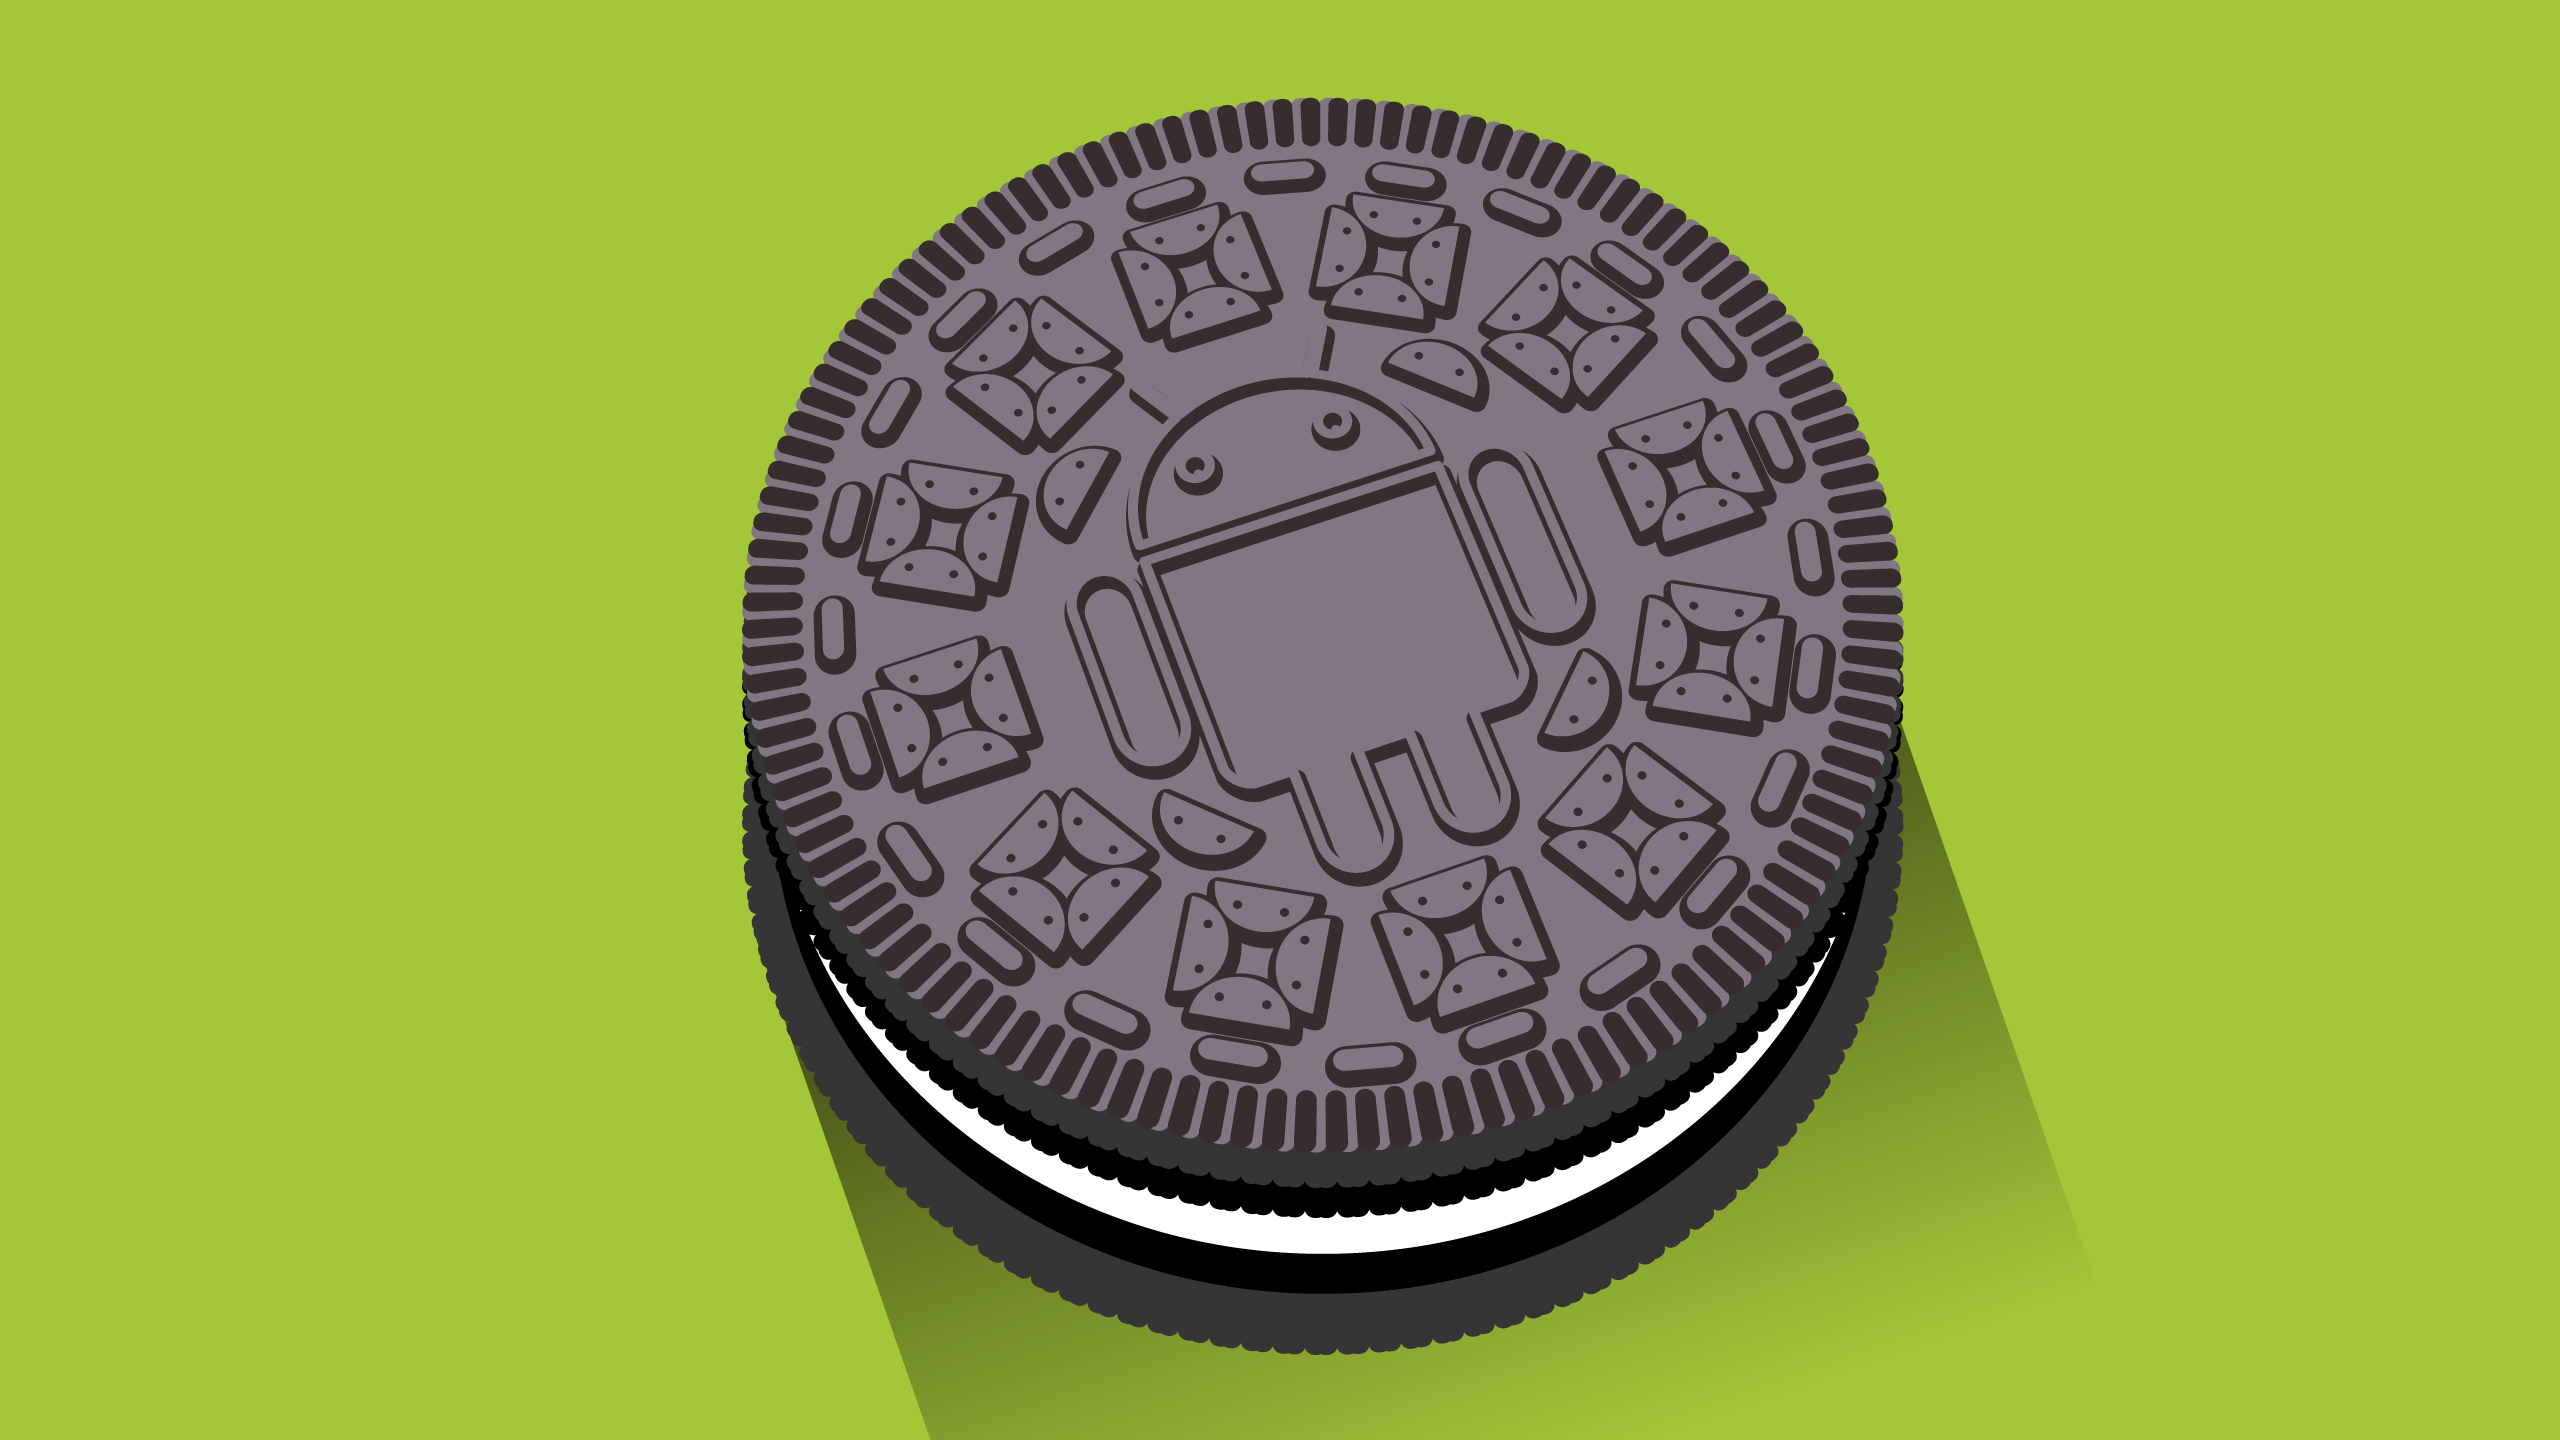 Here is what you need to know about the new Android Oreo